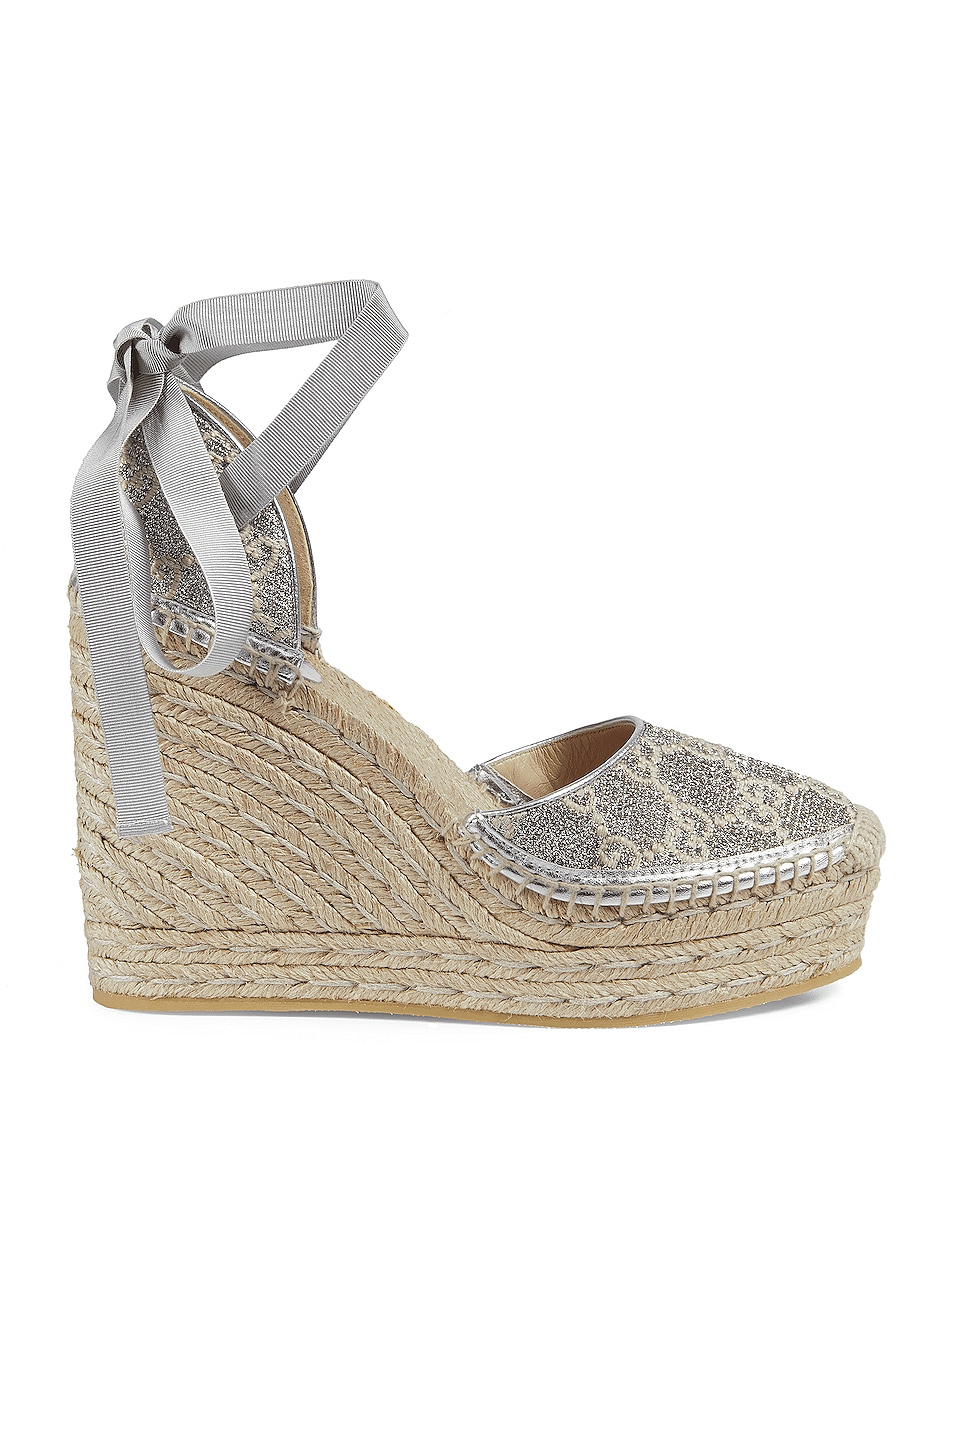 Image 1 of Gucci Pilar Espadrilles in Silver